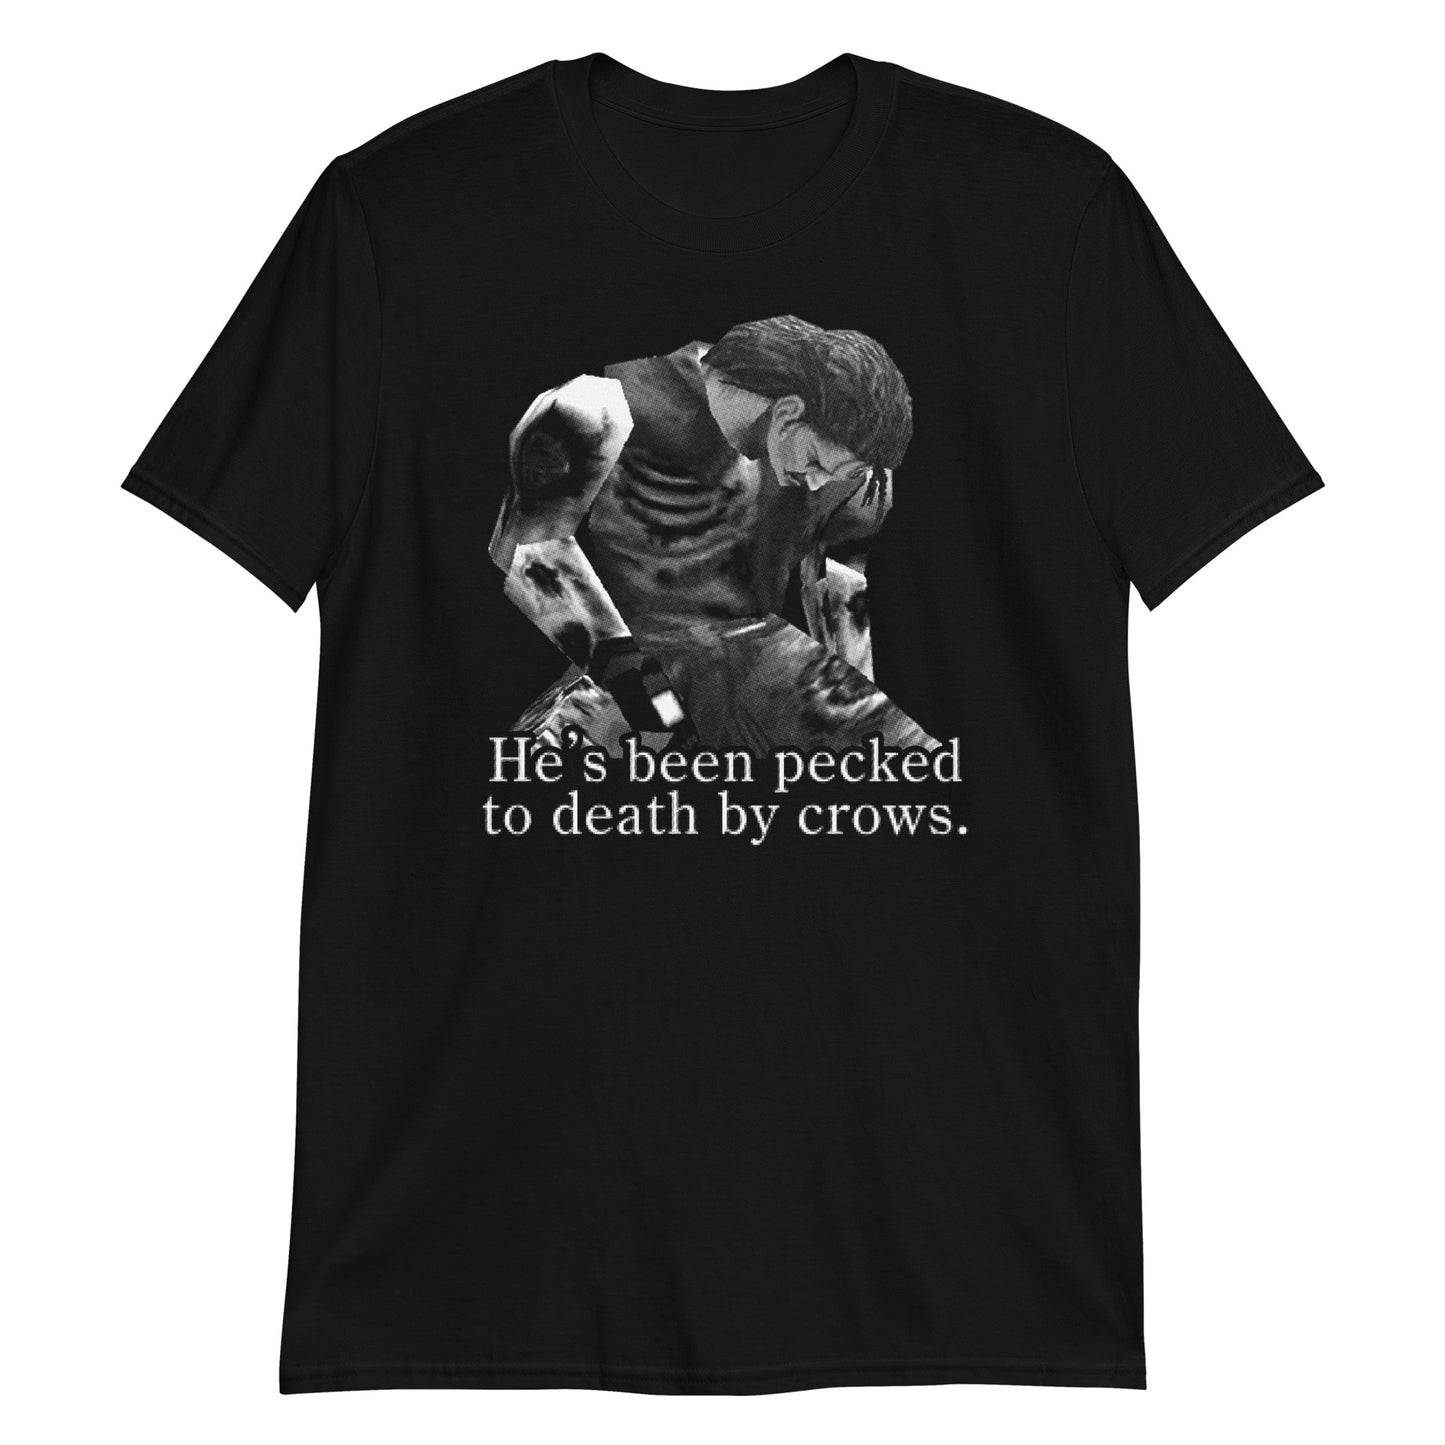 Pecked To Death t-shirt